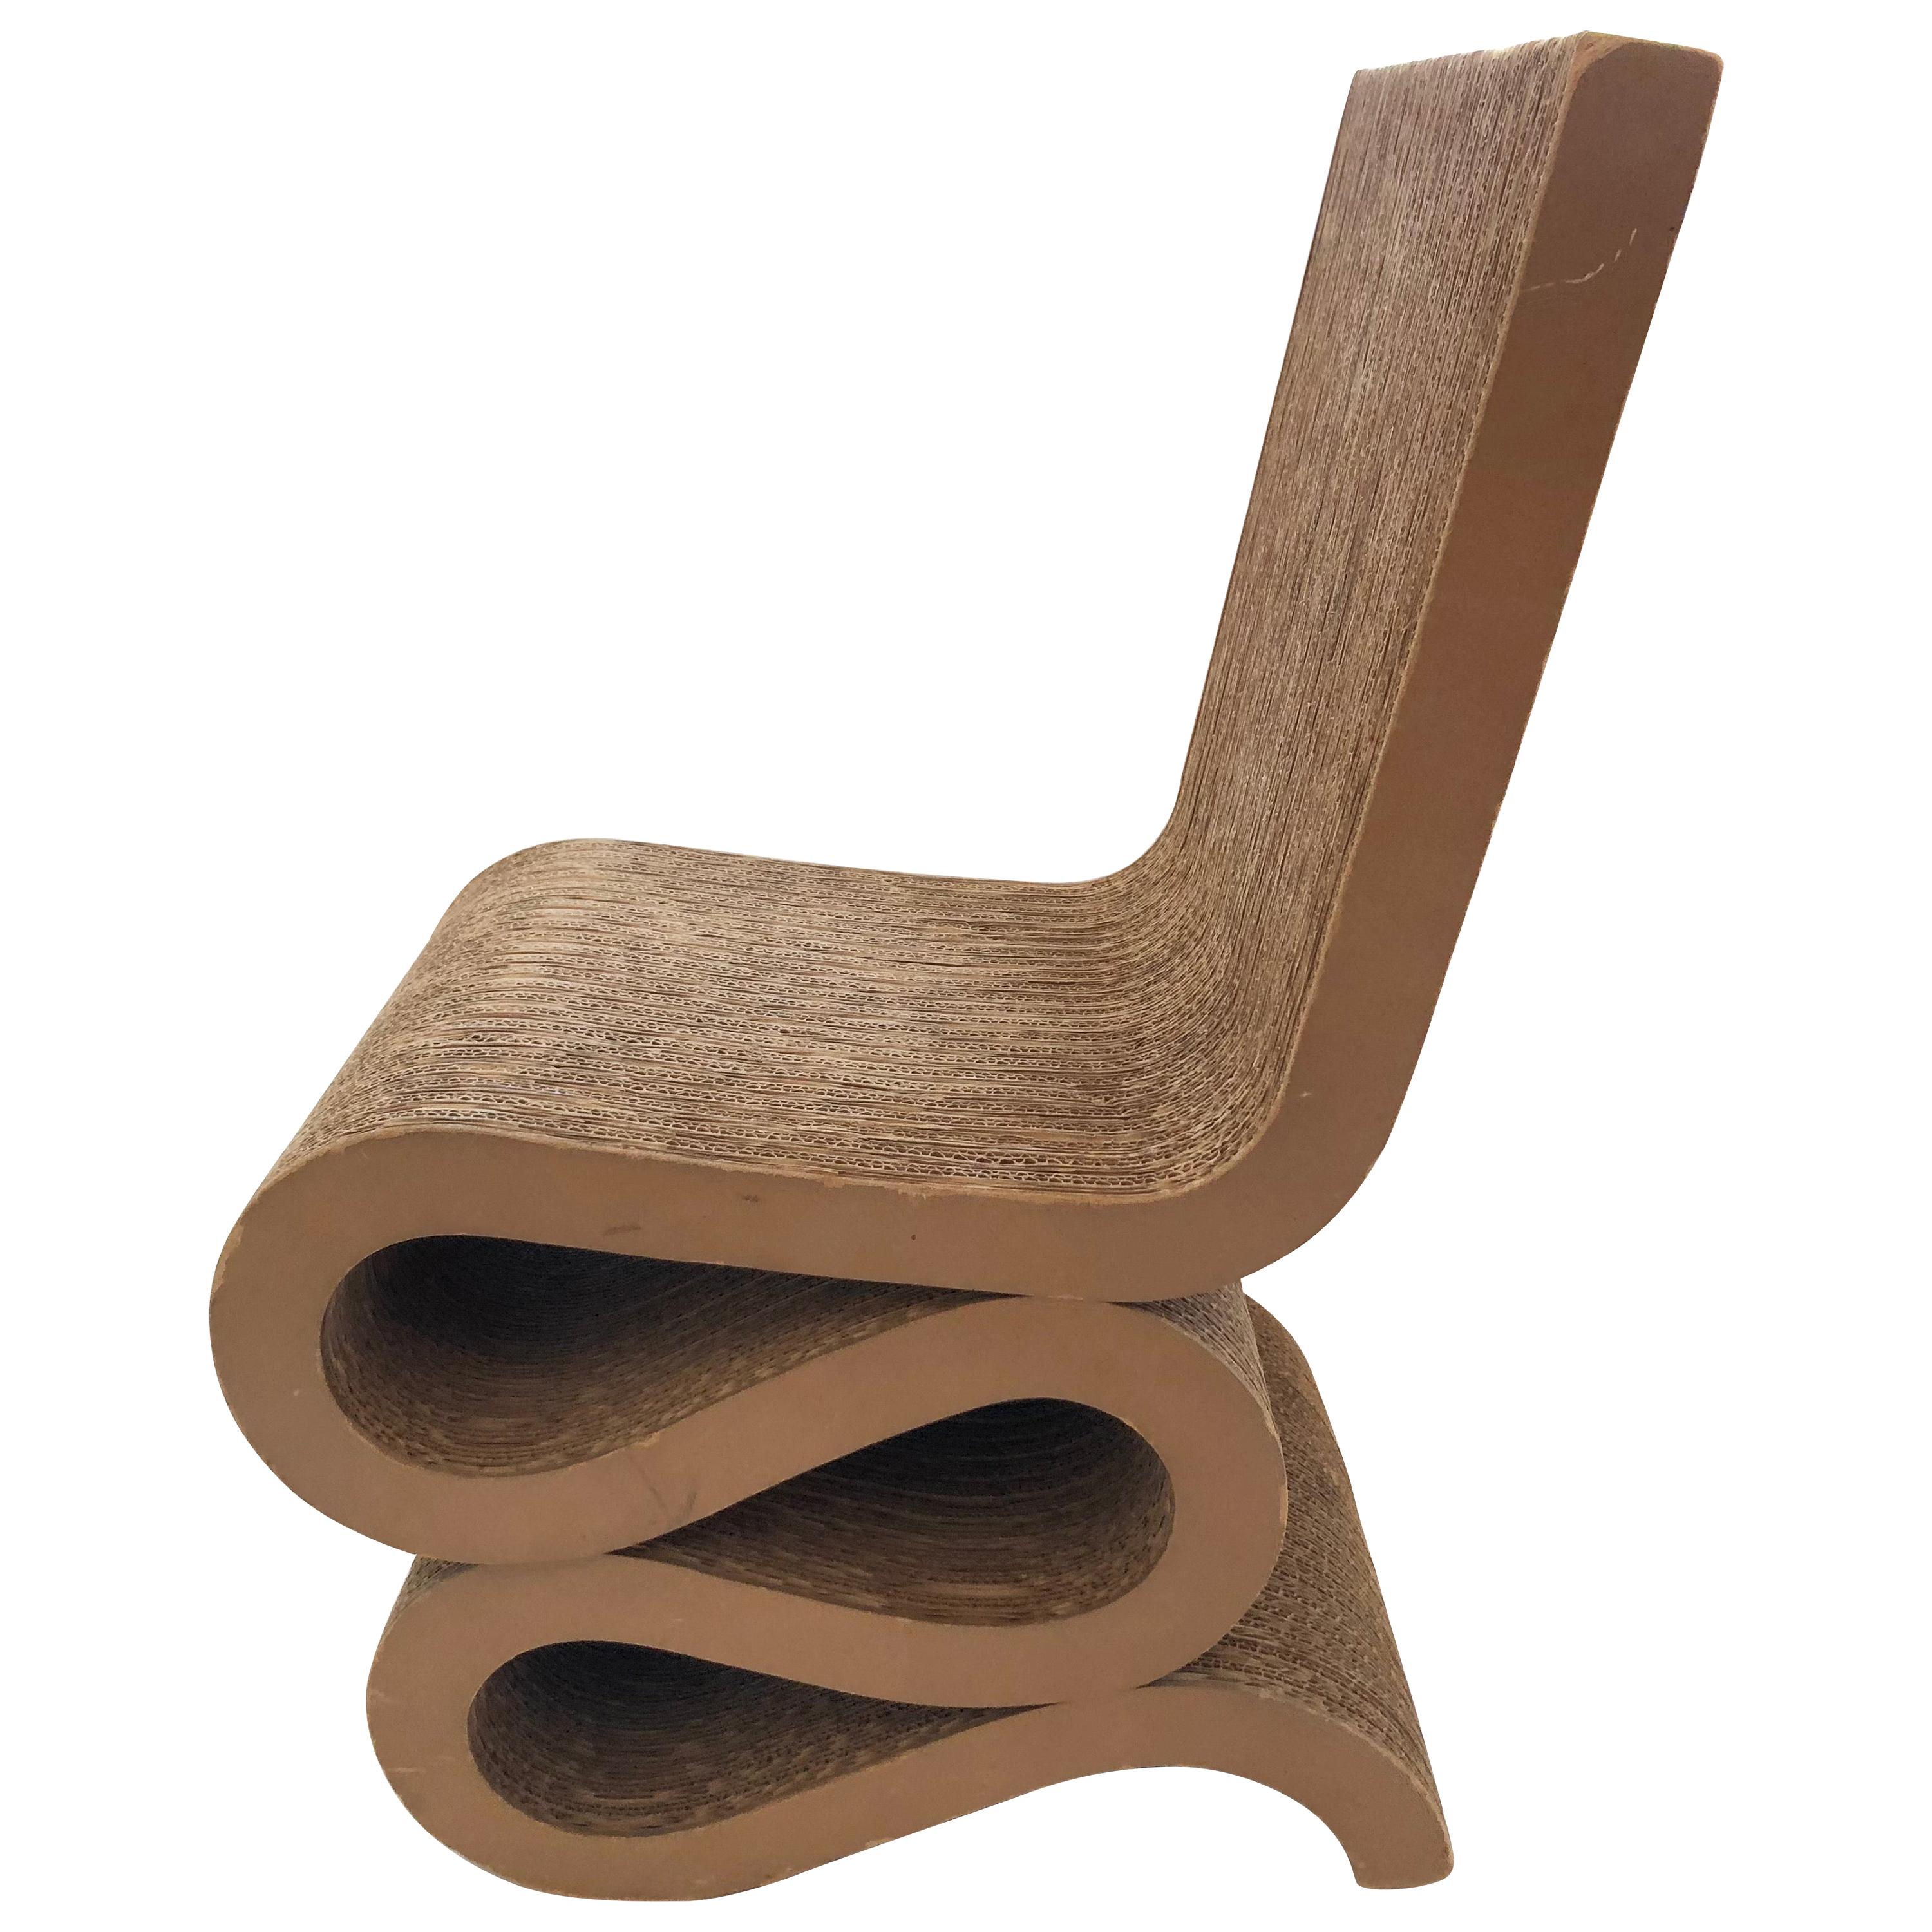 Wiggle Chair by Frank O. Gehry